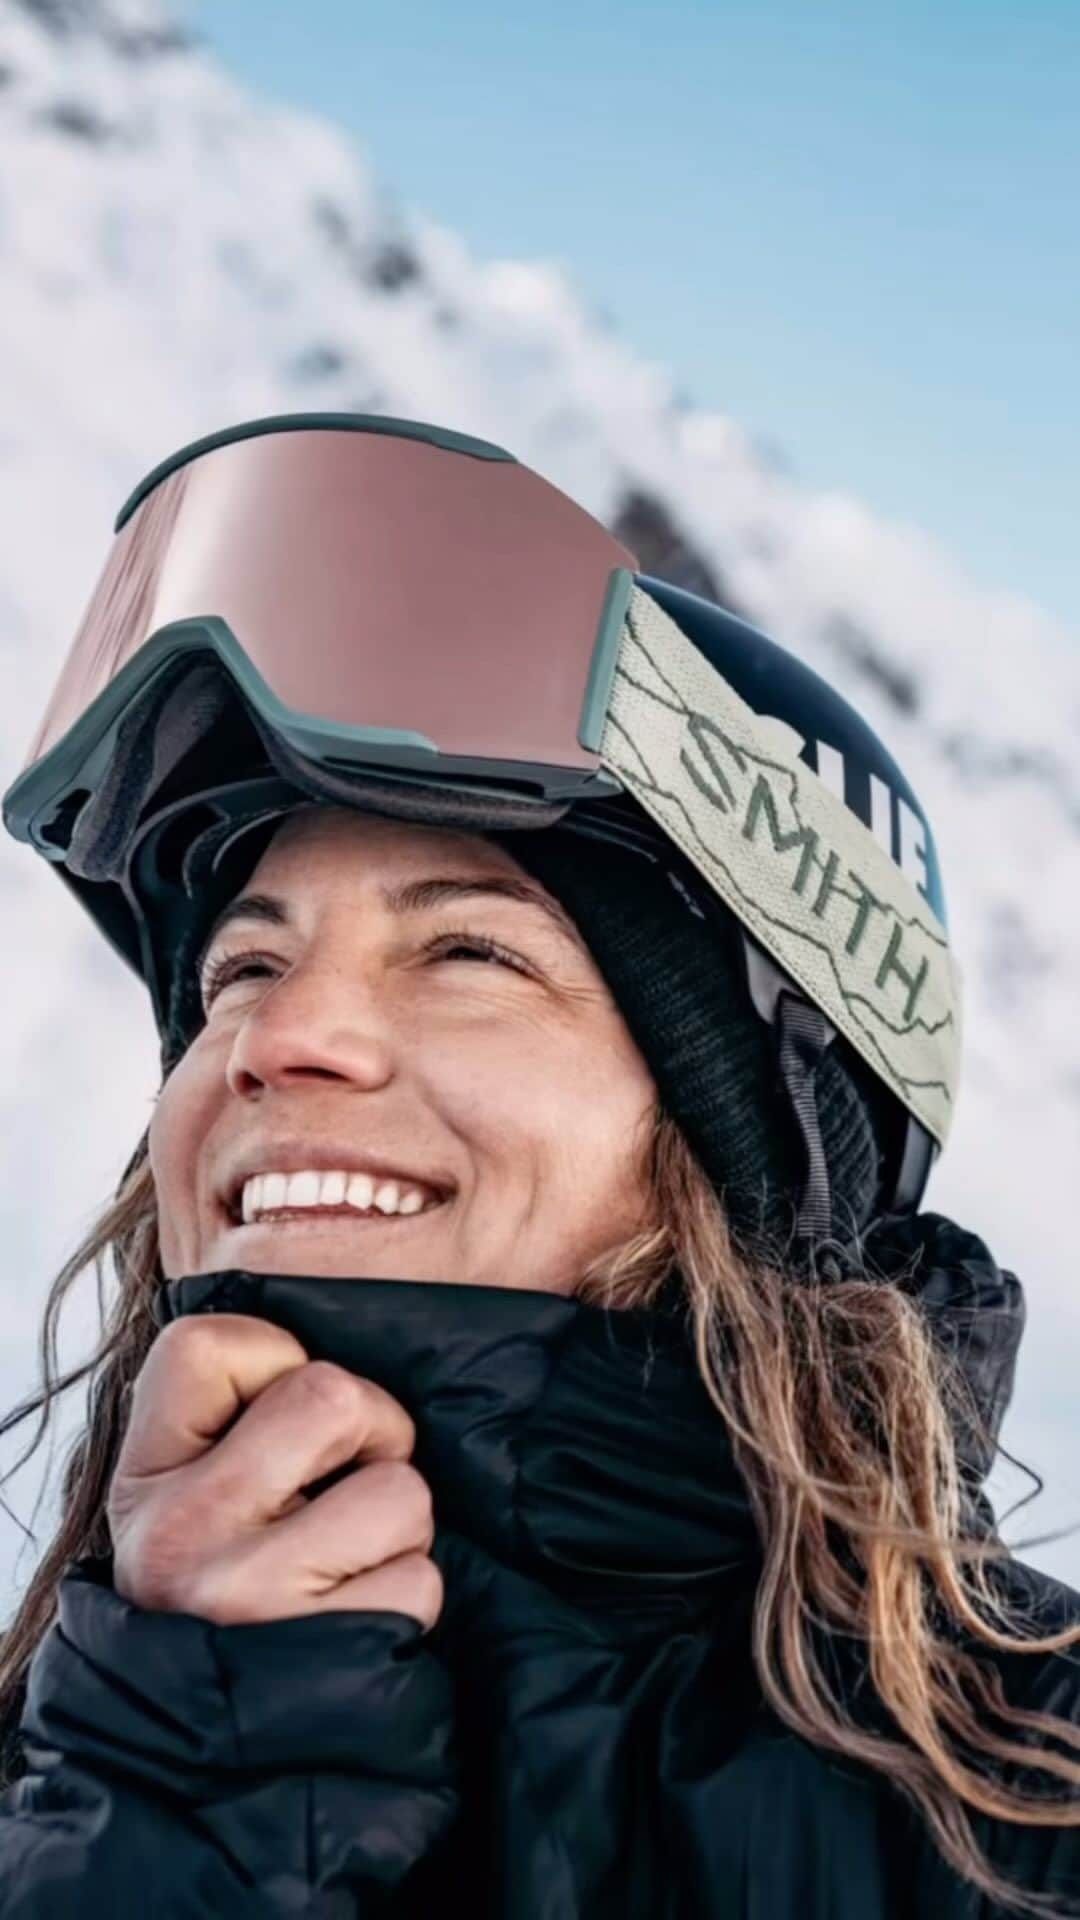 Smithのインスタグラム：「Honored to be launching a @smithoptics signature goggle!!! 💫 ~~~~~~~~ The design is centered around the idea of “home” being where you feel your truest self.  For me that is in the mountains. There’s nothing quite like the feeling of looking out over a vast mountainscape. Layers of peaks reaching out into the horizon, making you feel small and insignificant, yet connected at the same time. This simple mountainscape capped off by a setting moon and rising sun bring my imagination straight to my happy place; perched deep in the mountains looking out over the horizon.  Home amongst it all. 🏔️ ❄️ ☀️ 🌙  ~ NOW AVAILABLE ~ LINK IN BIO ~  #WeRunCold」